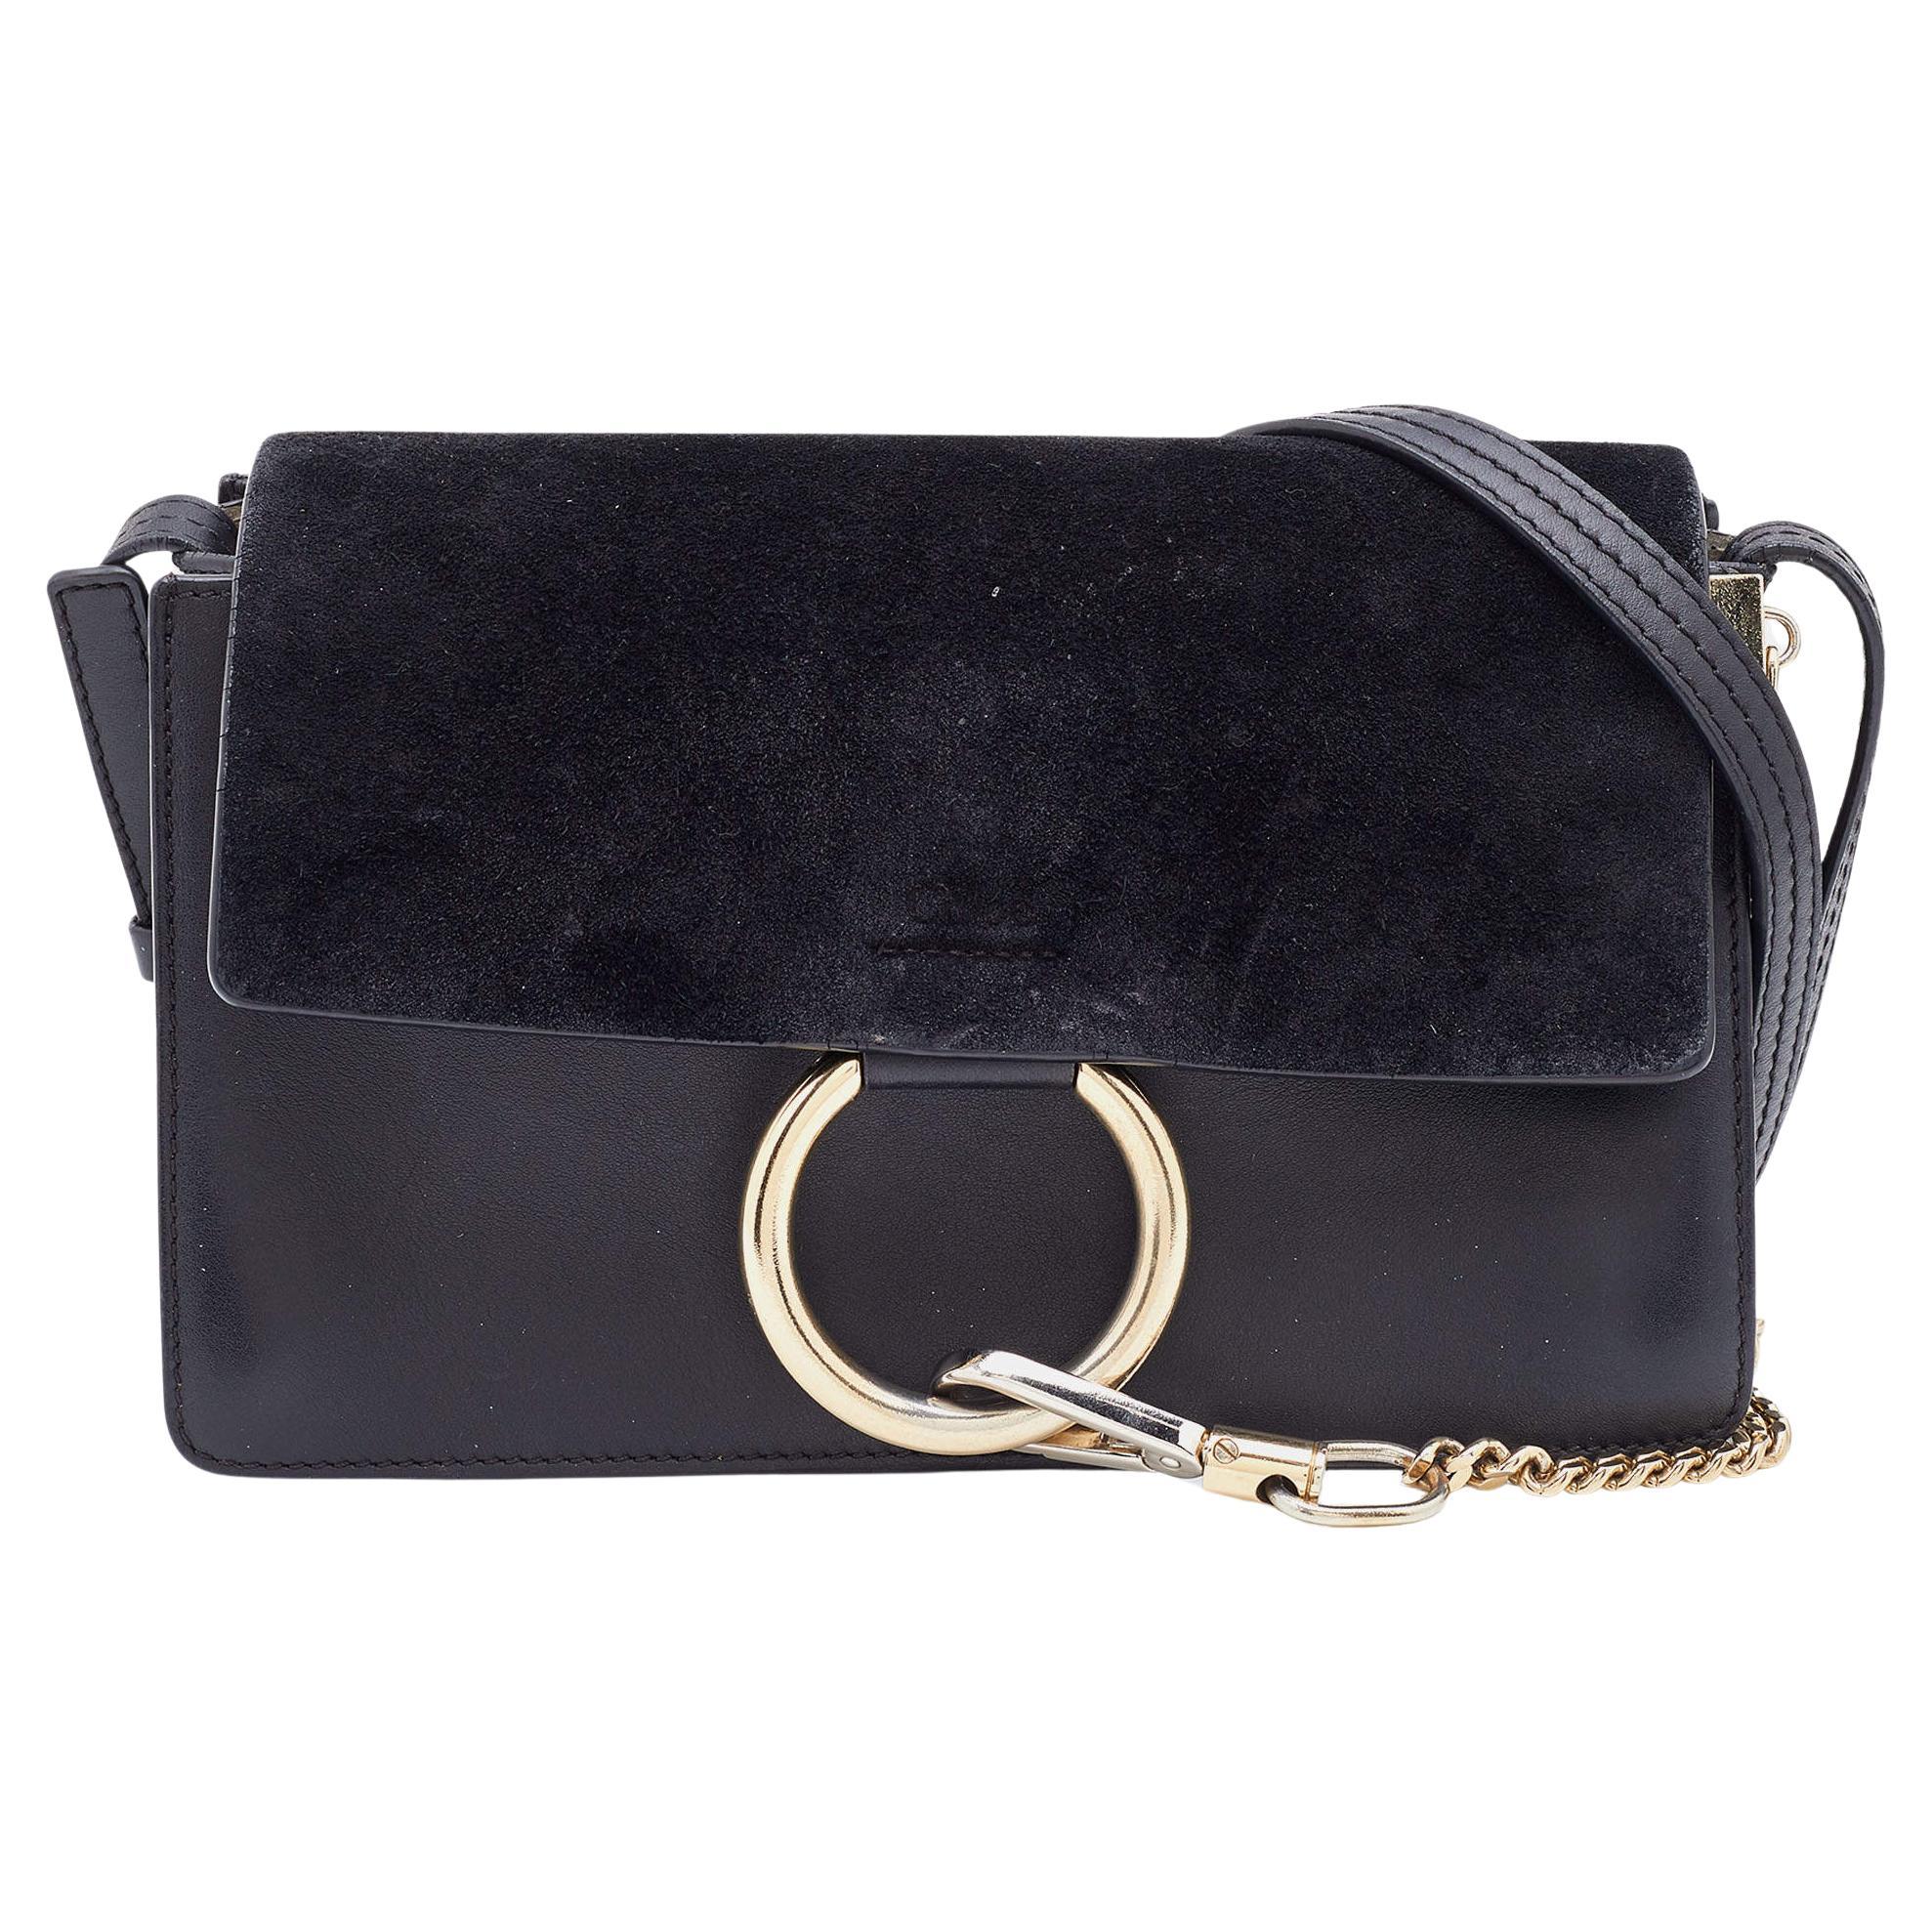 Chloe Black Leather and Suede Small Faye Shoulder Bag